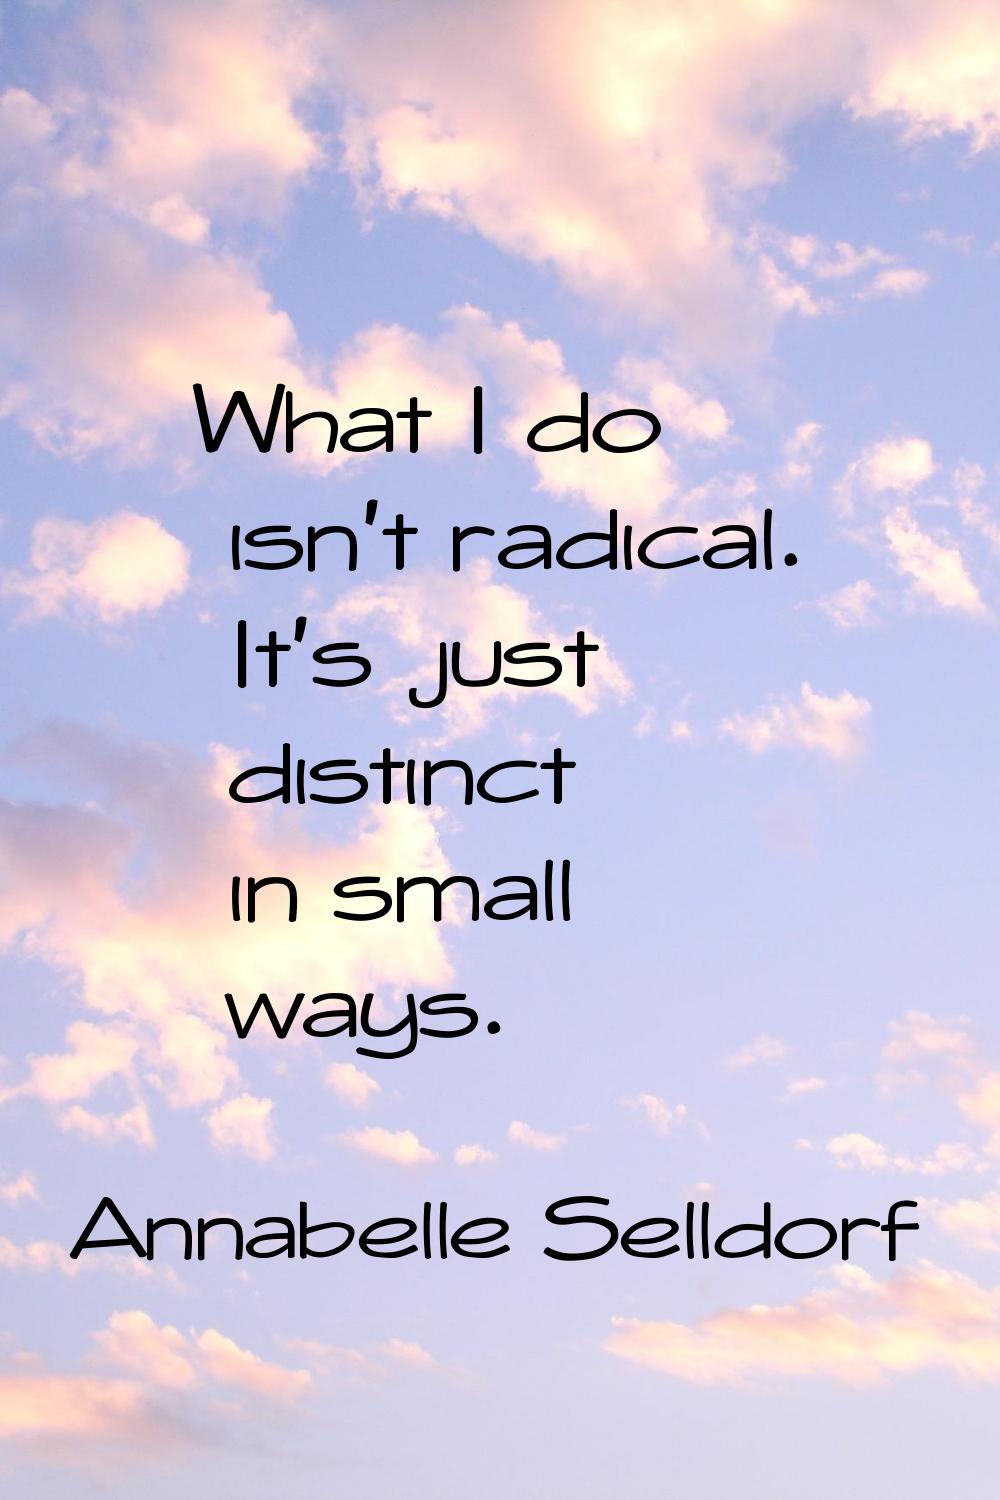 What I do isn't radical. It's just distinct in small ways.